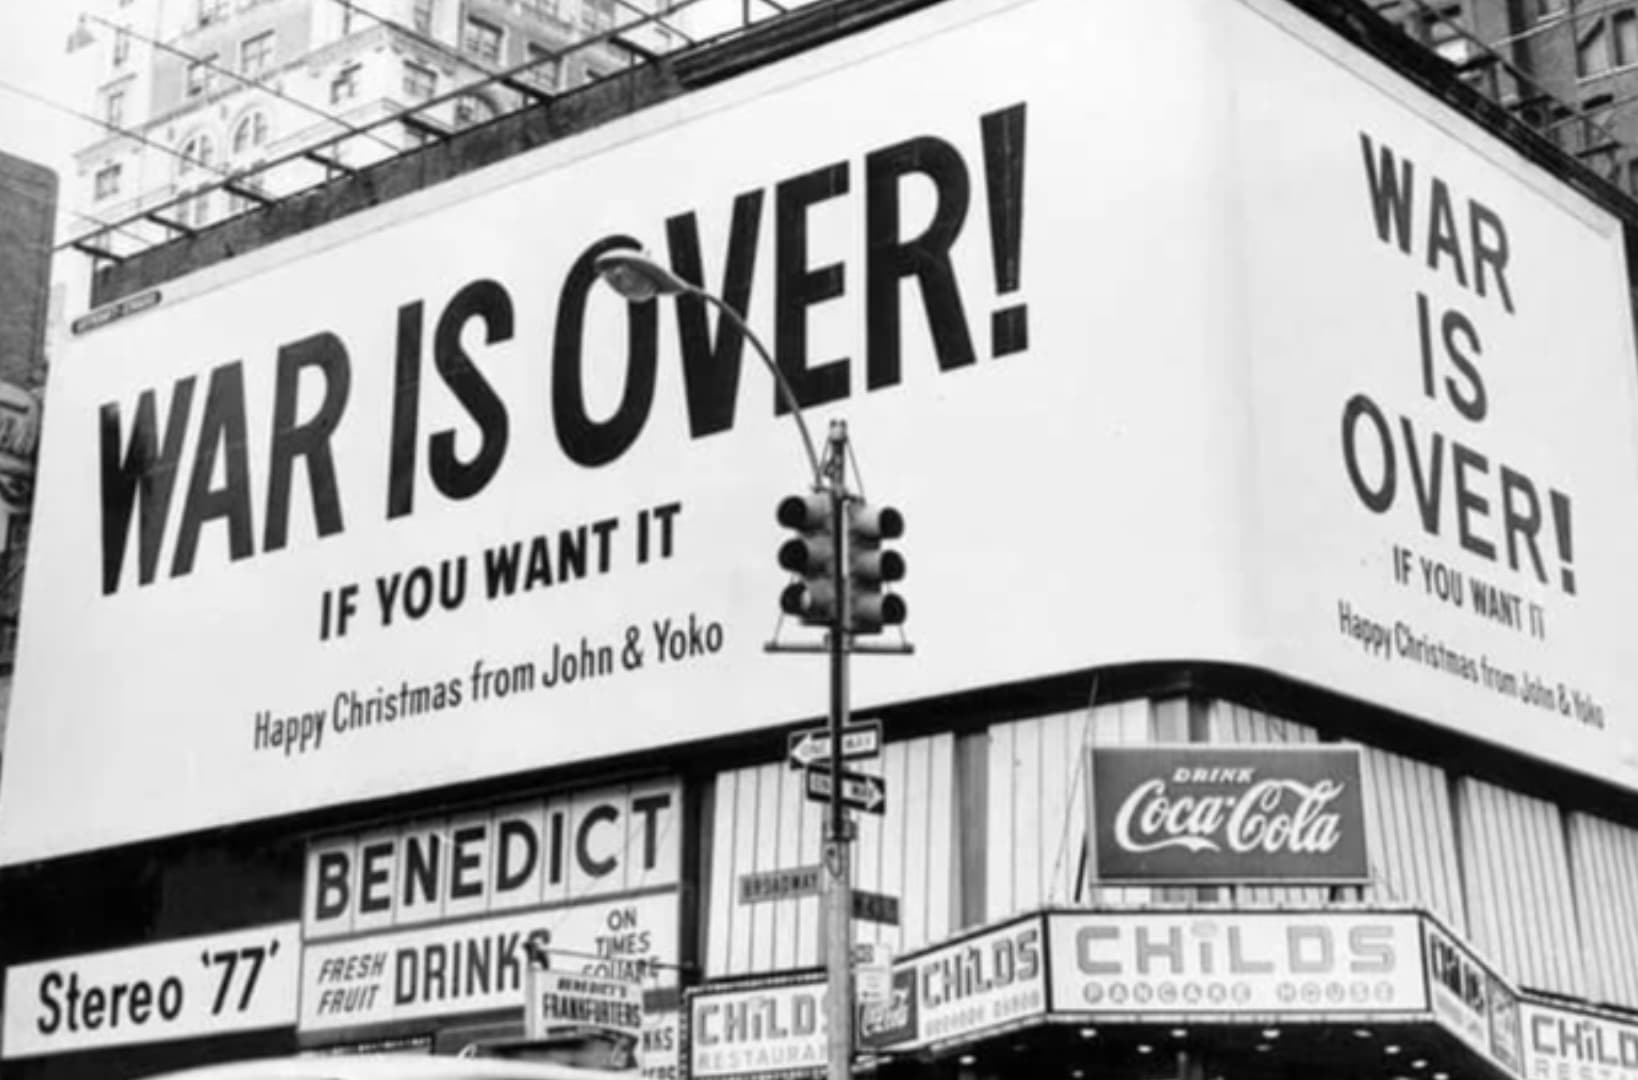 monochrome - War Is Over! If You Want It Happy Christmas from John & Yoko Benedict Stereo '77' Fresh Fruit Drinks On Frankfurters War Is Over! If You Want It Happy Christmas from John&oku Restauran Drink CocaCola 0000000 00000 Childs Childs Child Schilds